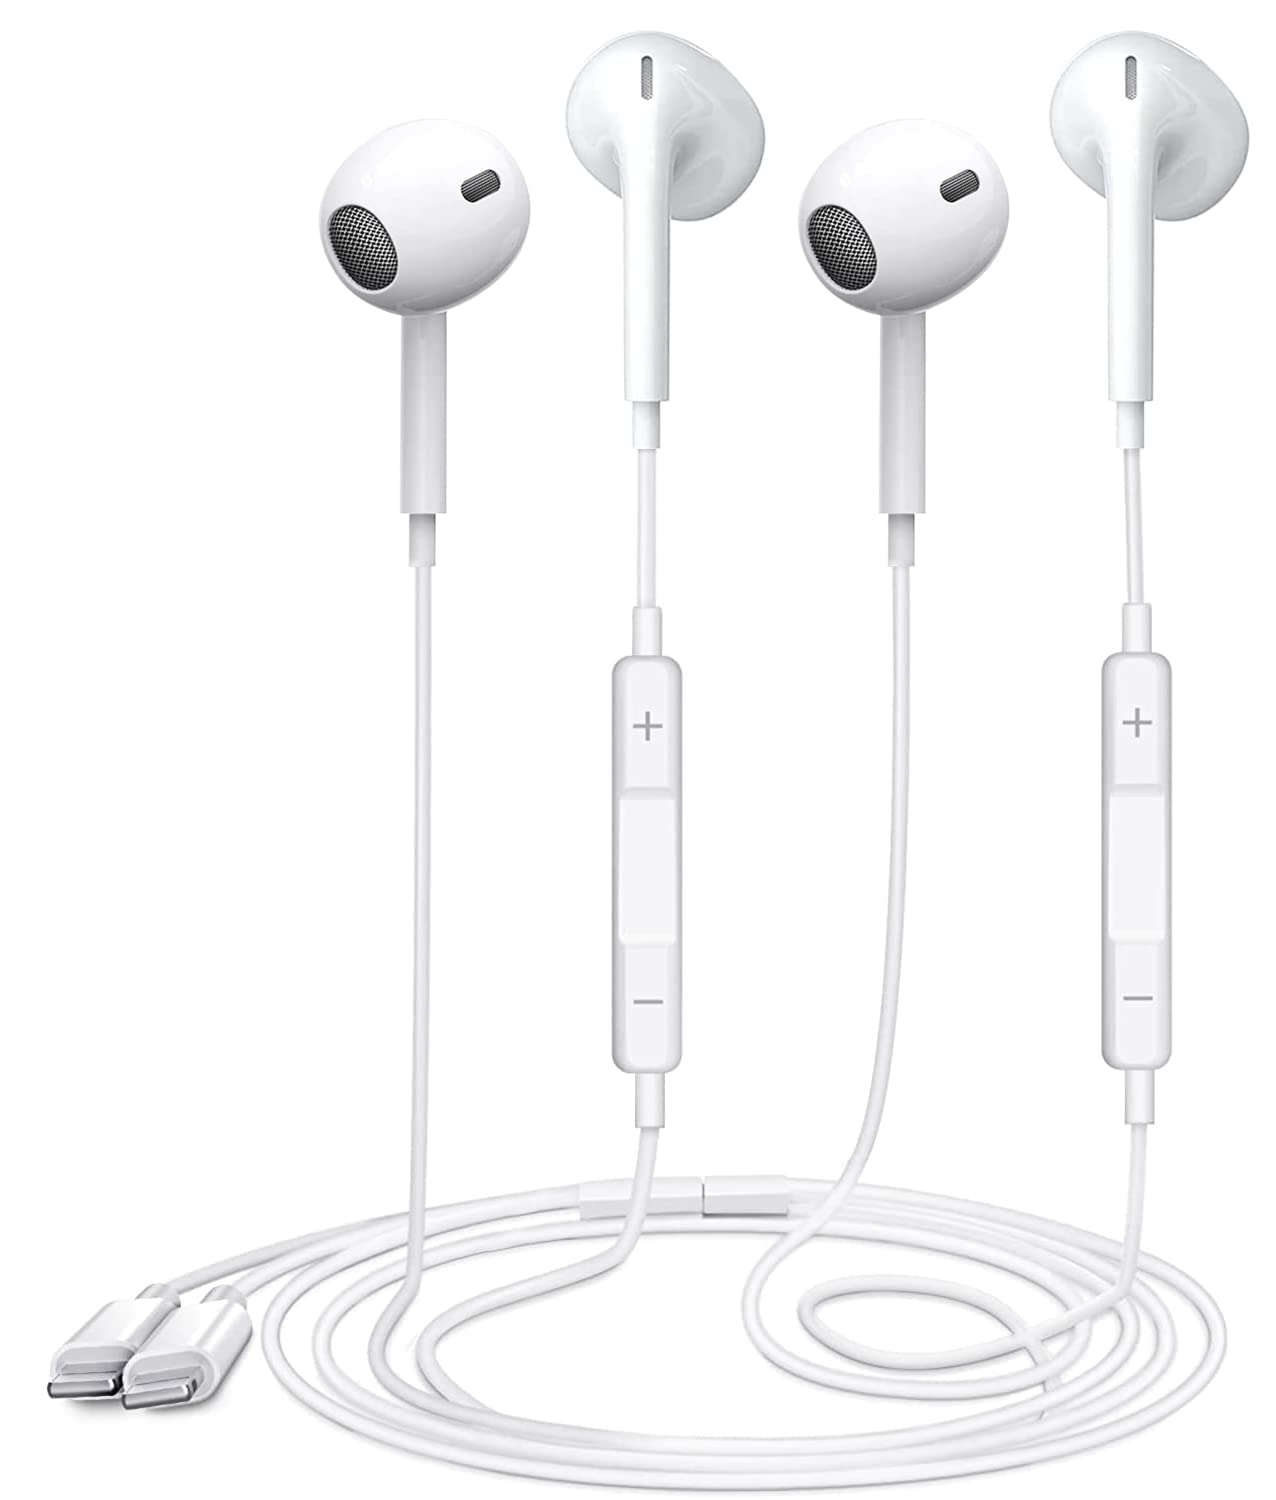 2 Pack Apple Earbuds iPhone Headphones [Apple MFi Certified] Earphones with Lightning Connector (Built-in Microphone & Volume Control) Compatible with iPhone 14/13/12/11/XR/XS/X/8/7 Support All iOS